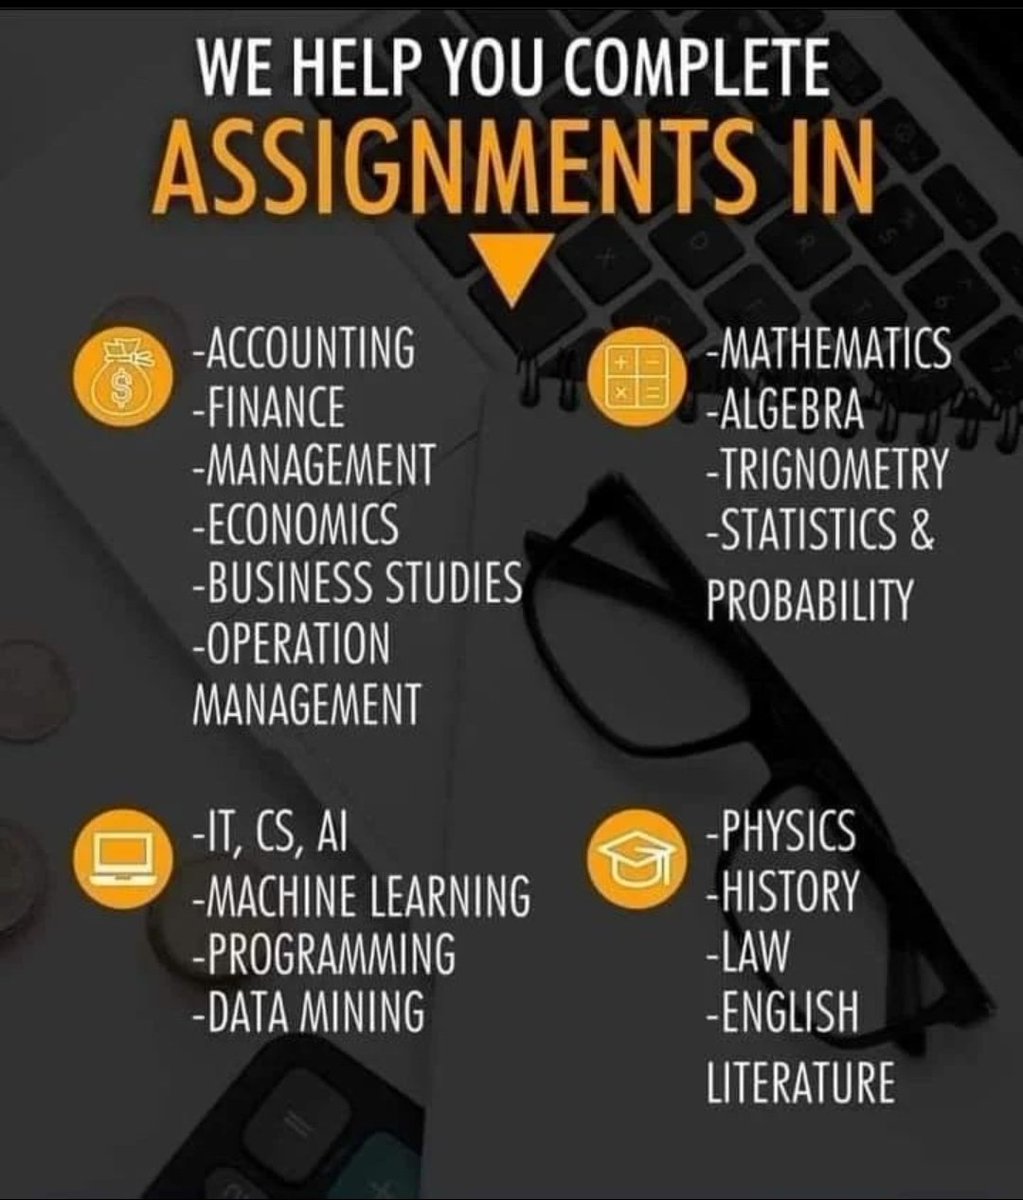 Need help with the following assignments: Pay paper Pay essay Sociology Physics Psychology Maths Stats Anatomy Chemistry Analytics Geometry Agriculture Pharmacy Accounting Assignment due Homework due Excel paper Engineering Calculus Statistics Geography Algebra Coursework